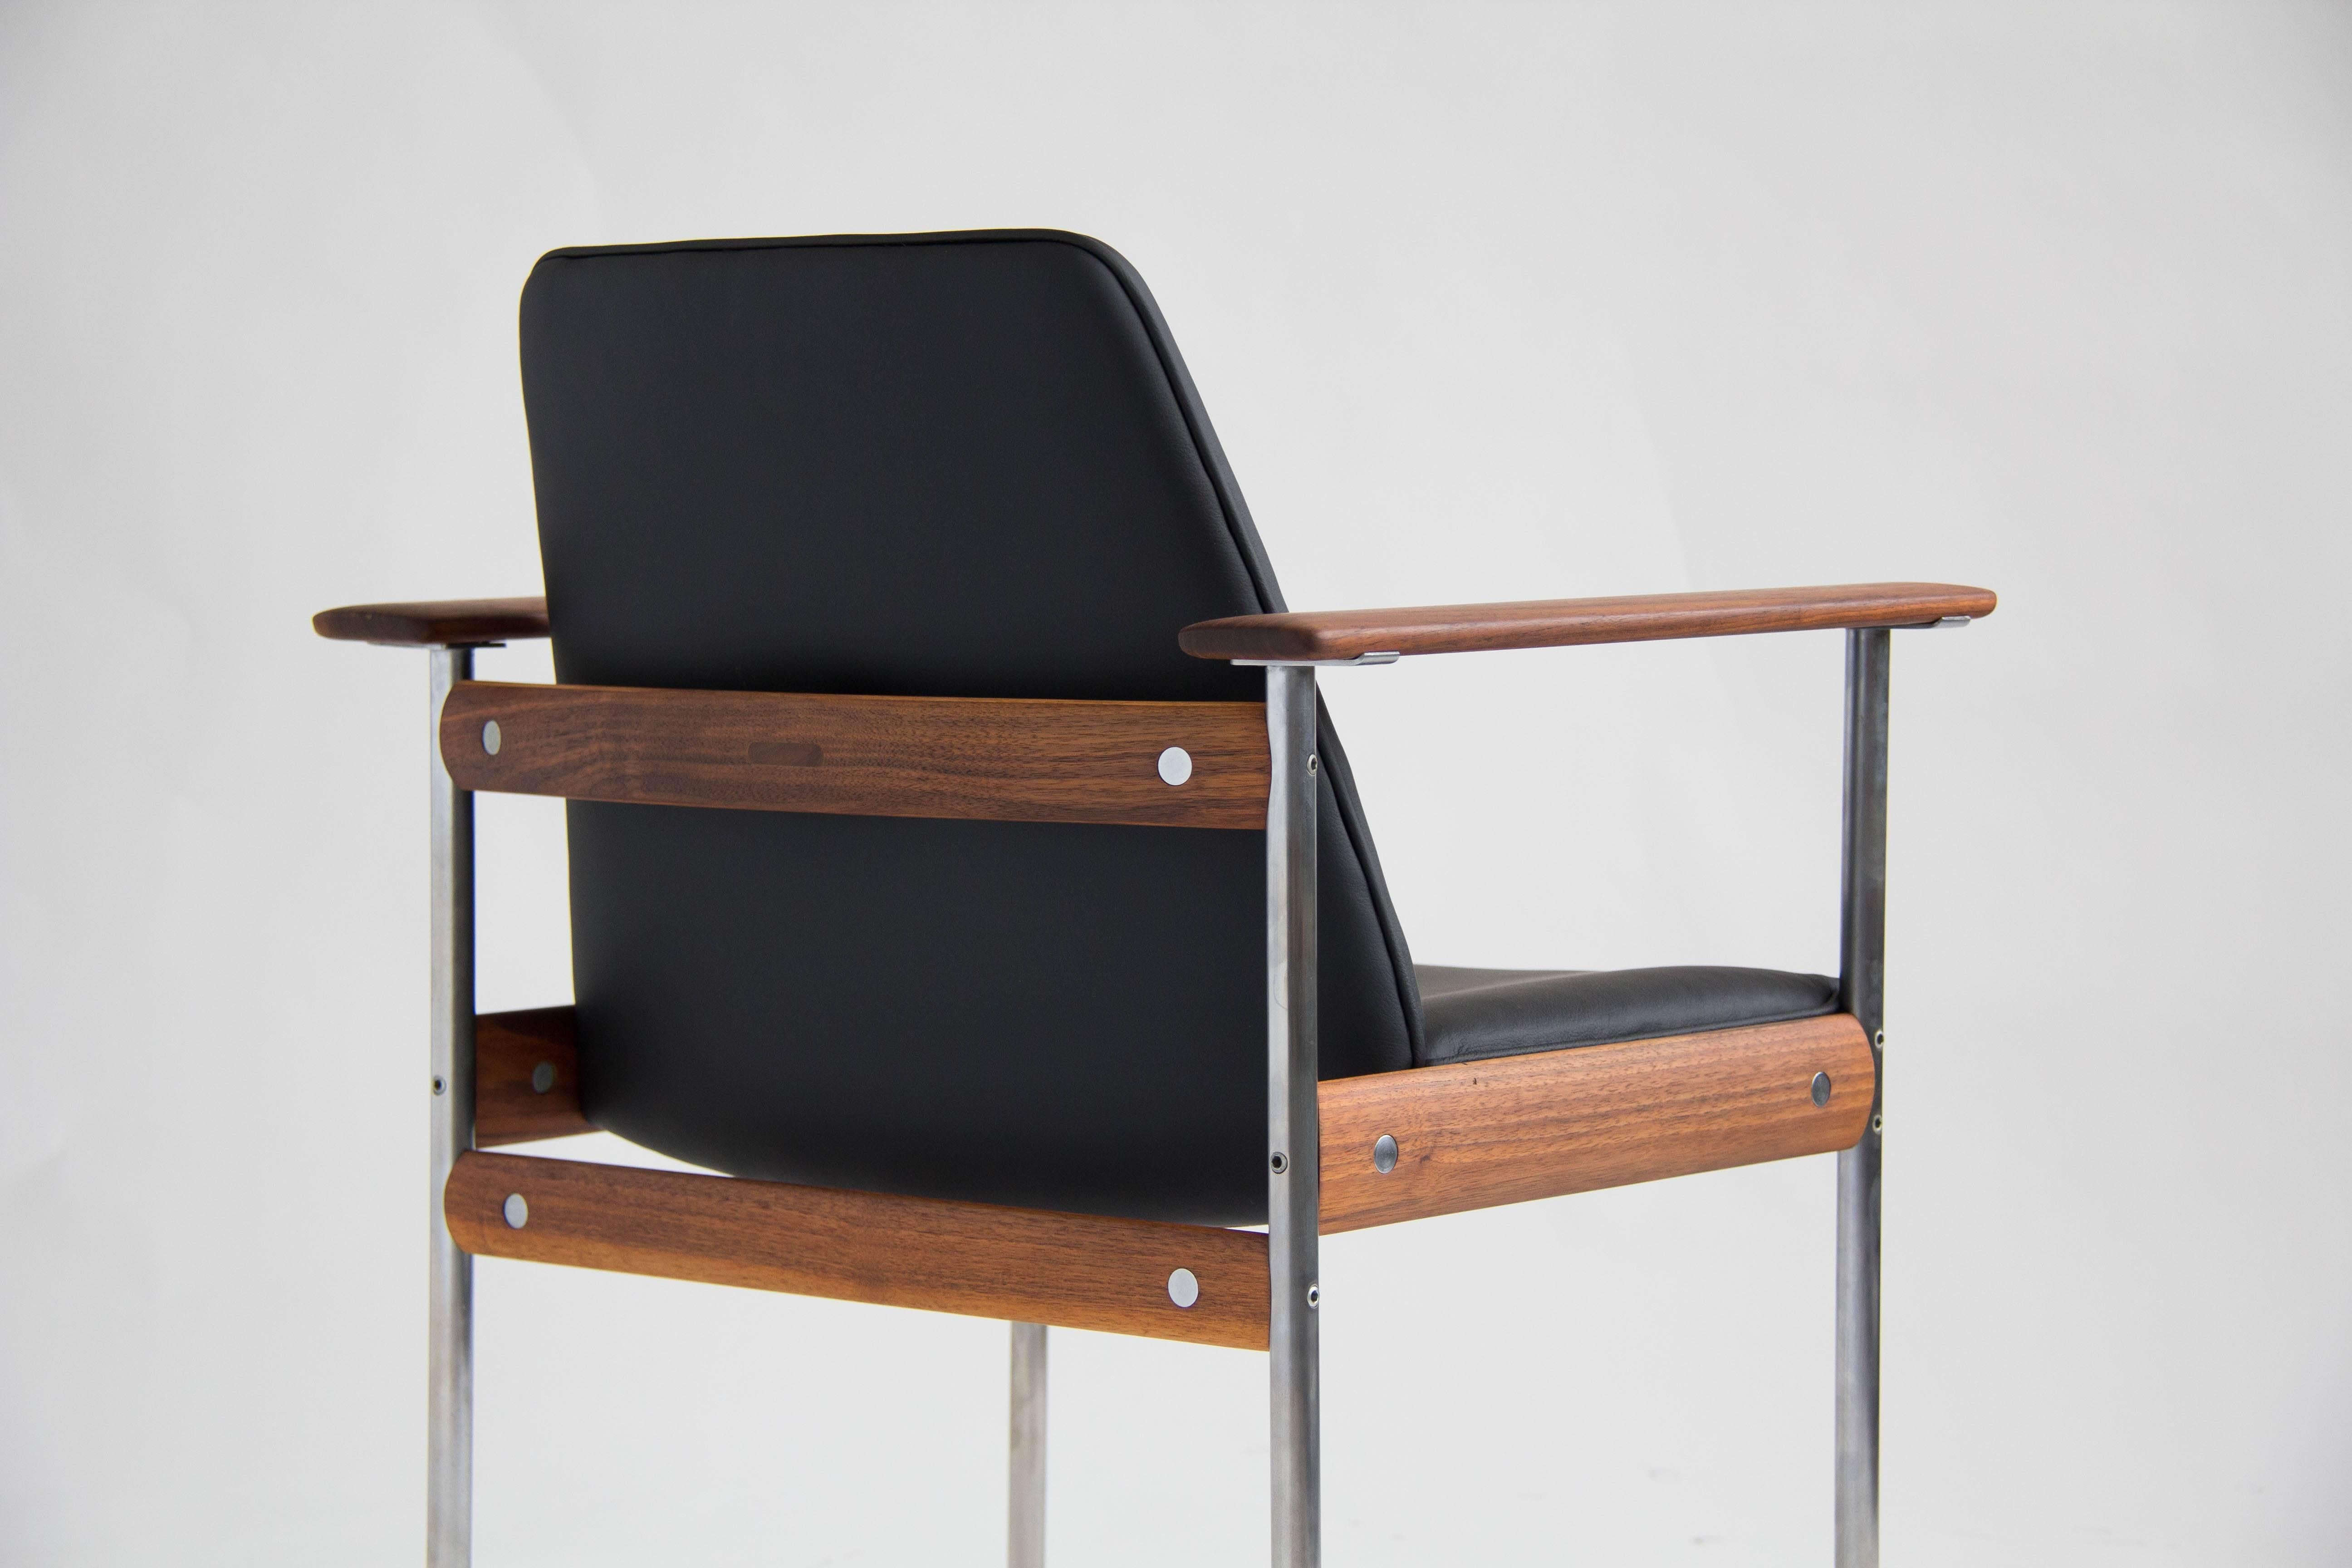 Mid-20th Century Set of Six Teak and Leather Dining/Conference Chairs by Sven Ivar Dysthe